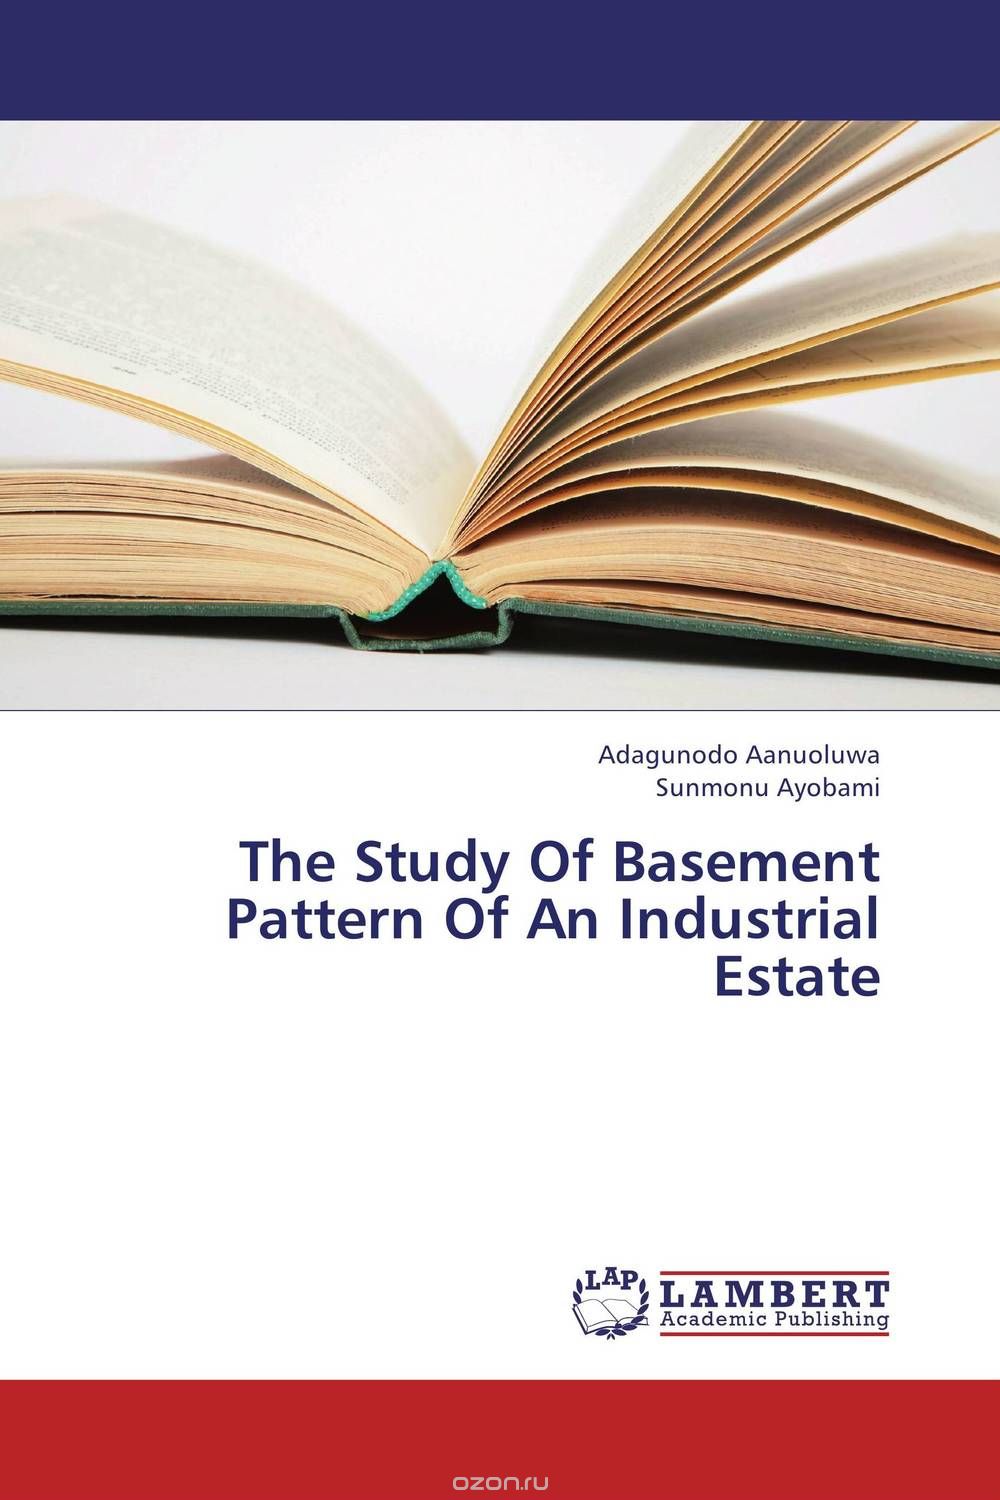 The Study Of Basement Pattern Of An Industrial Estate